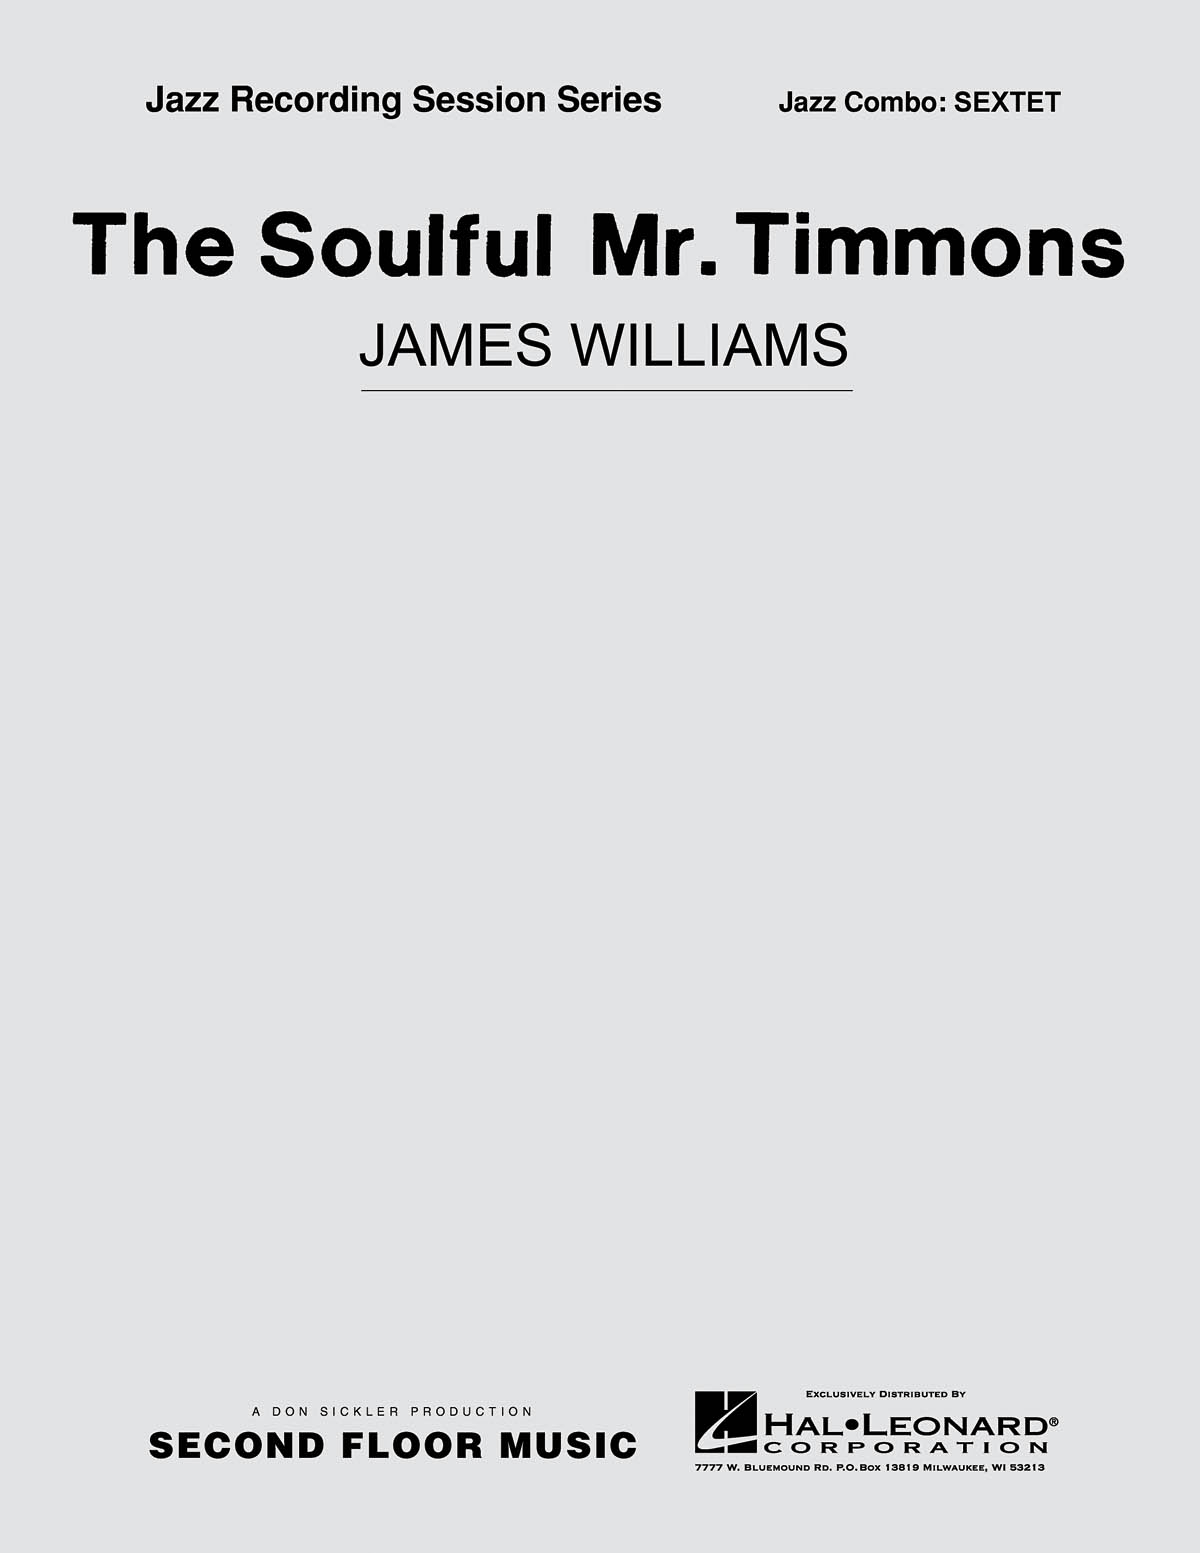 The Soulful Mr. Timmons – Sextet Septet